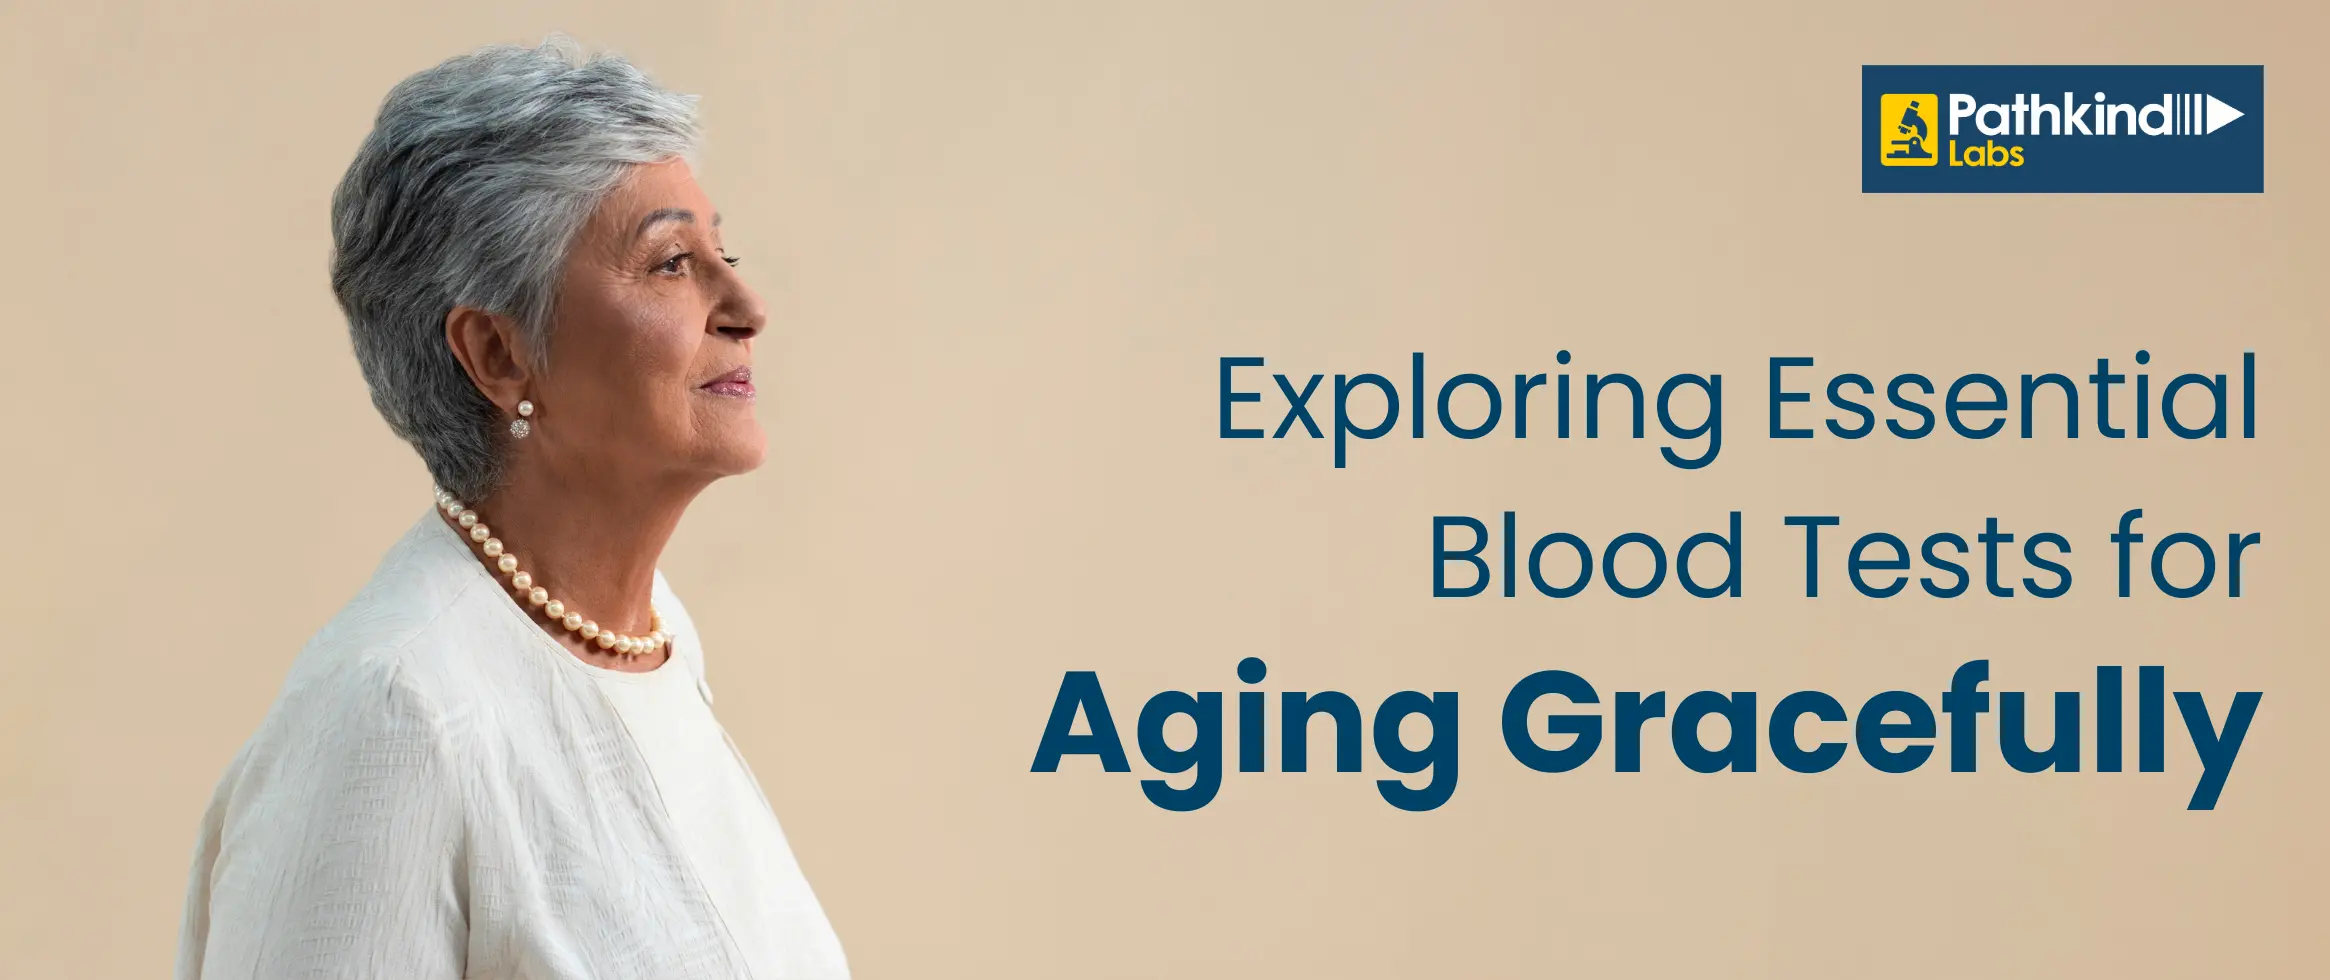  Nutritional Deficiencies: Essential Blood Tests for Better Aging